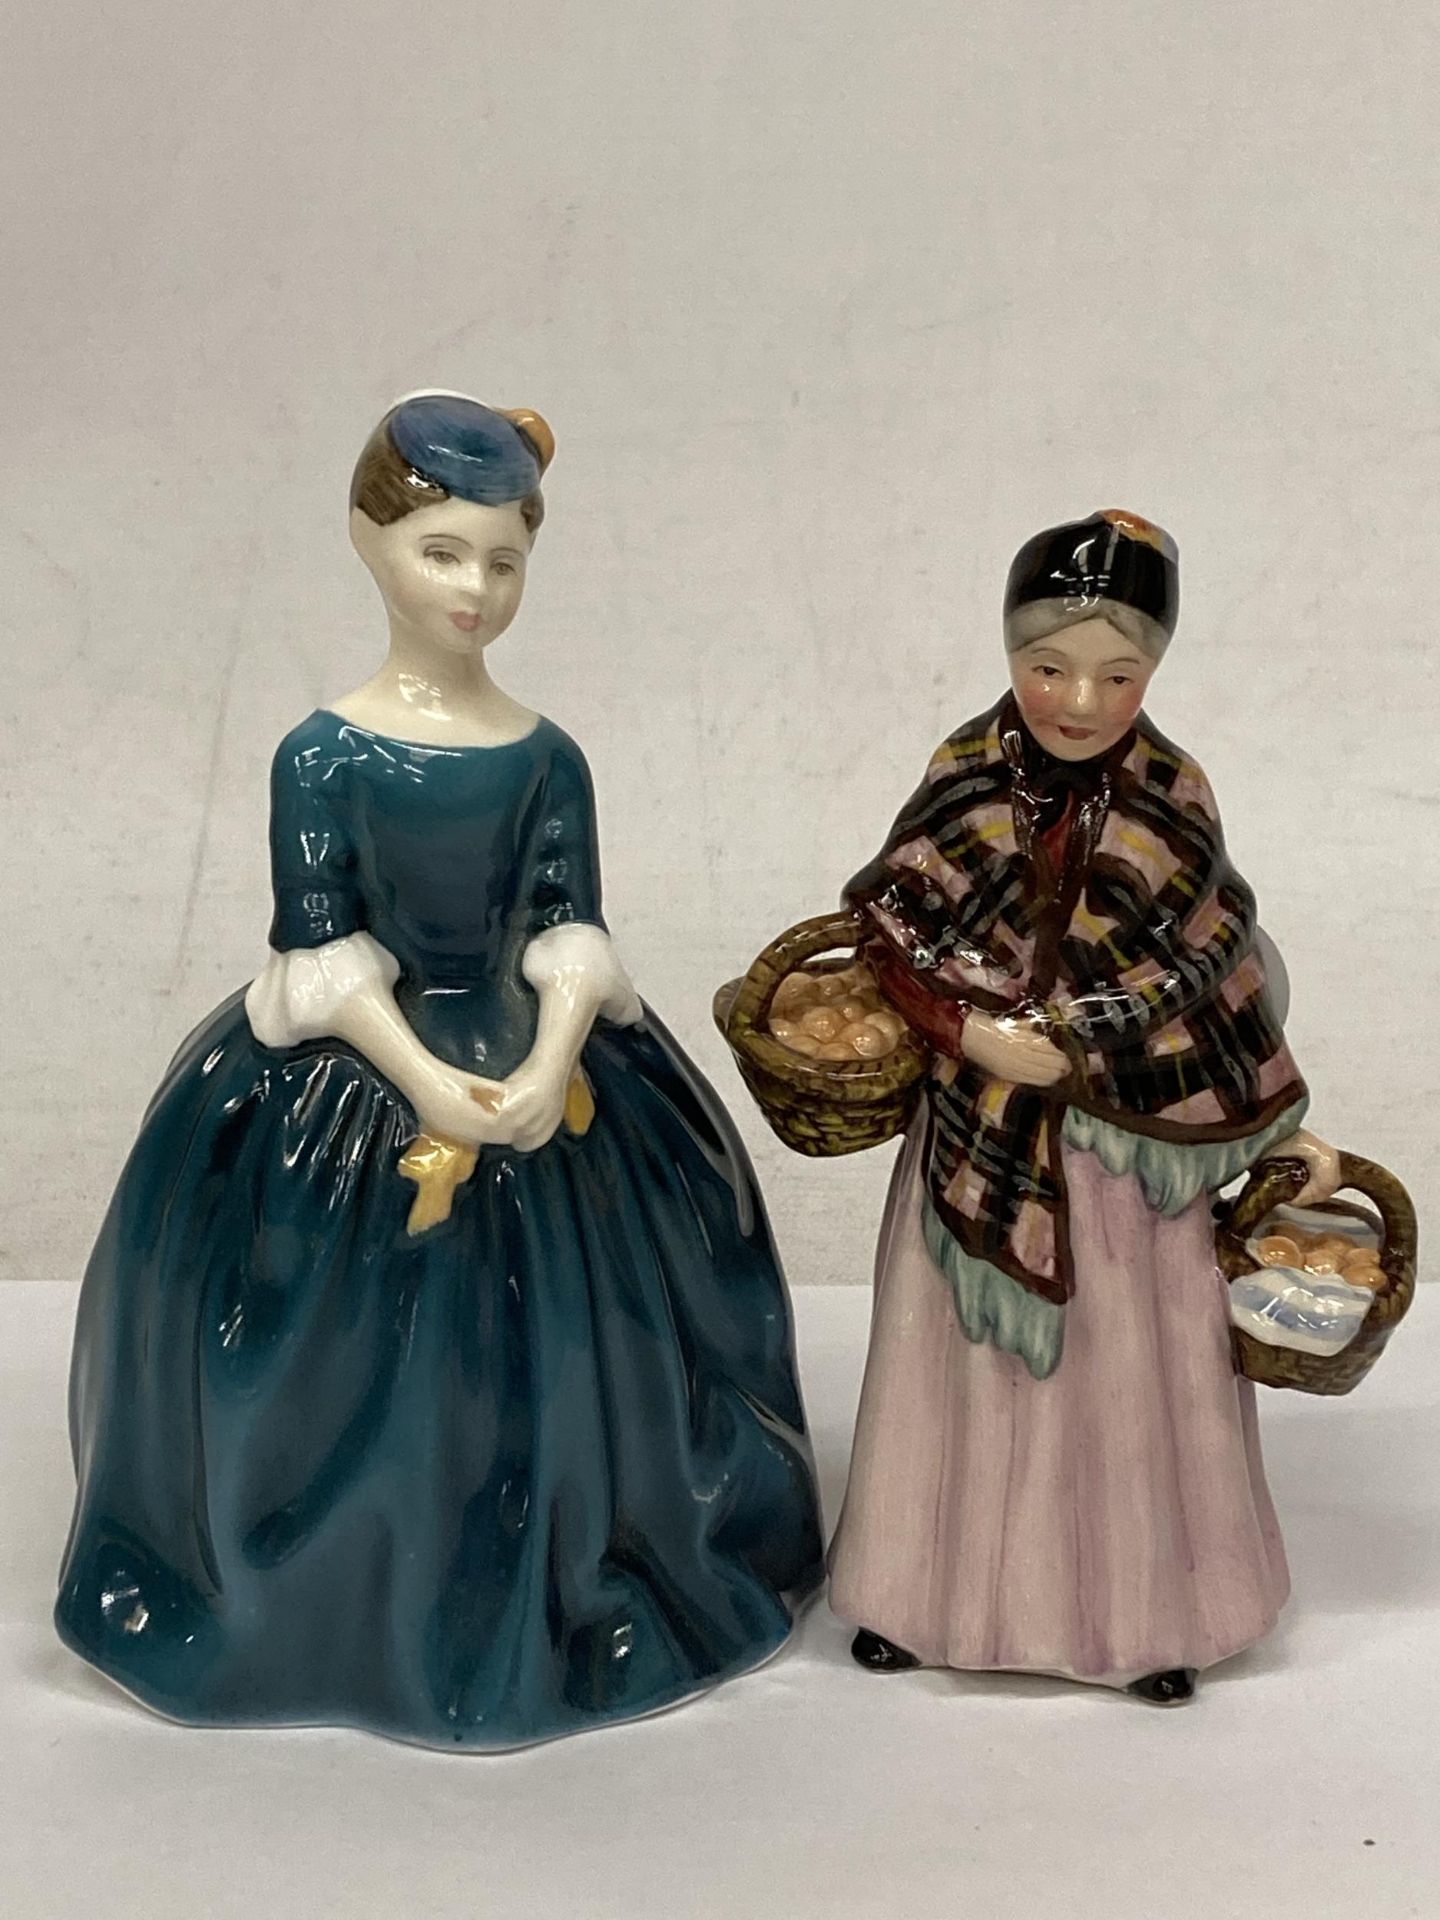 TWO ROYAL DOULTON FIGURINES "THE ORANGE LADY" FROM THE MINIATURE STREET VENDORS AND CHERIE HN2341